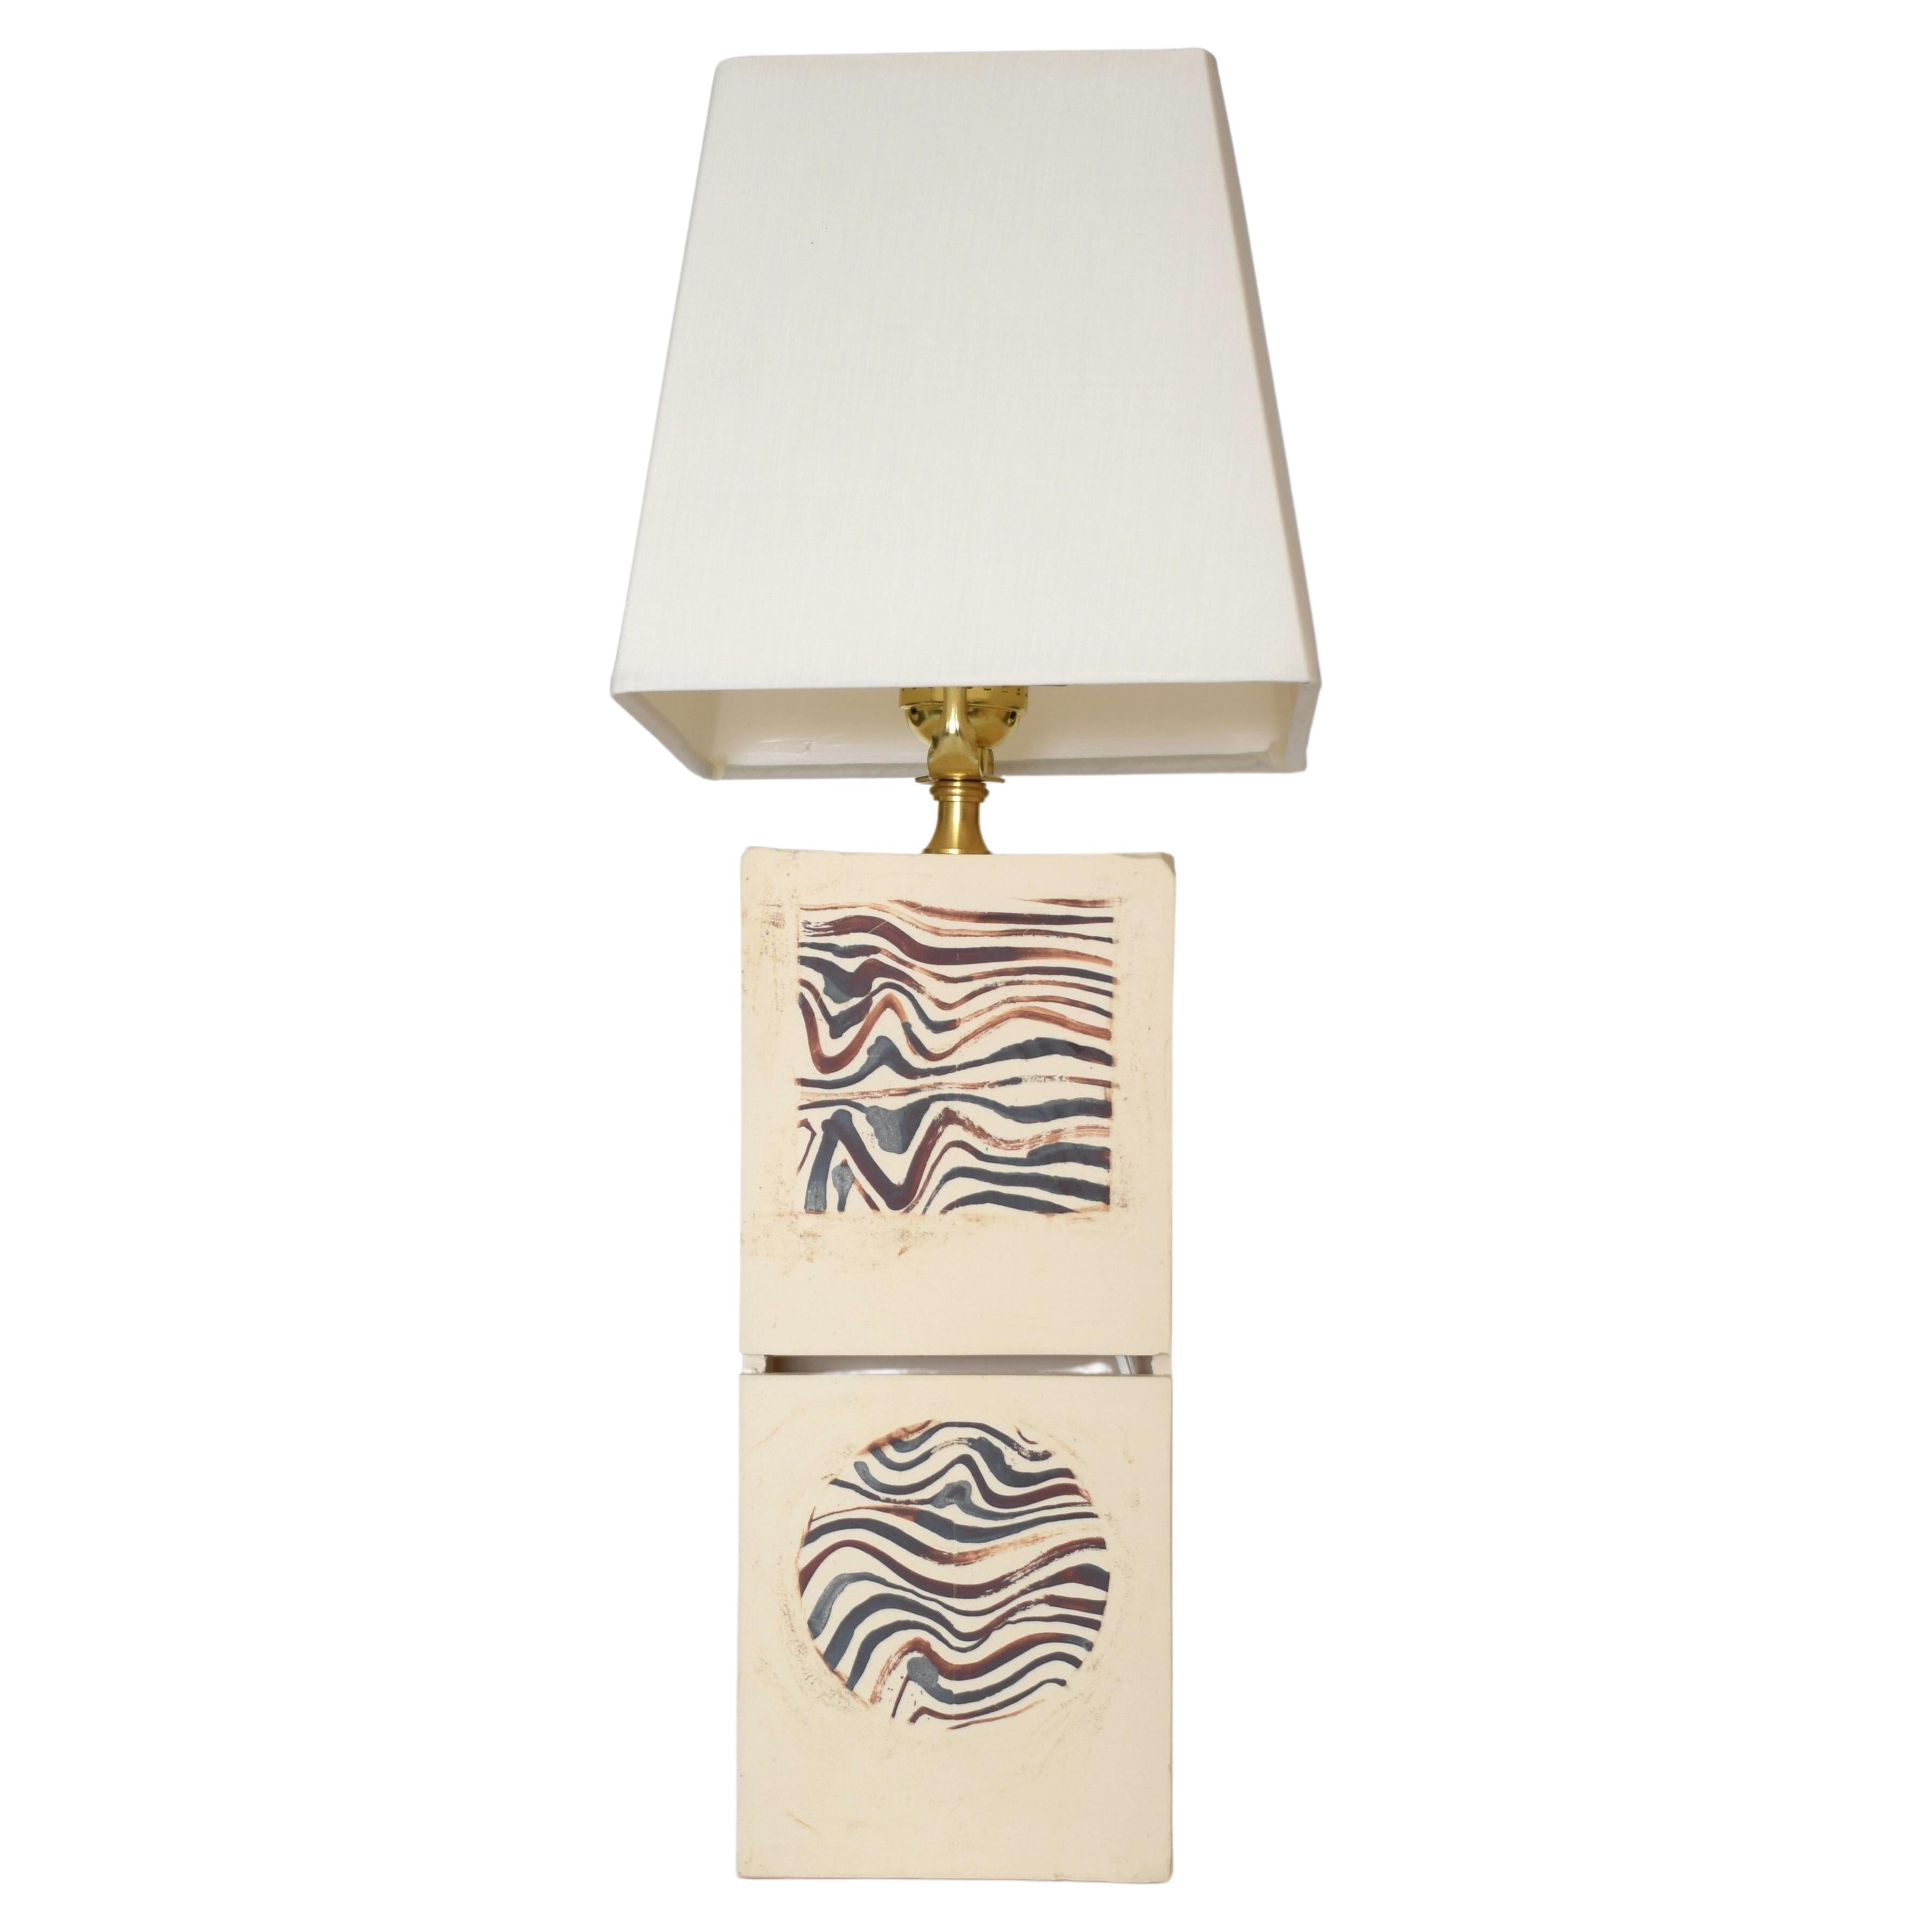 Customizable Hand-Painted Ceramic "Two Squares" Lamp by James Hicks For Sale